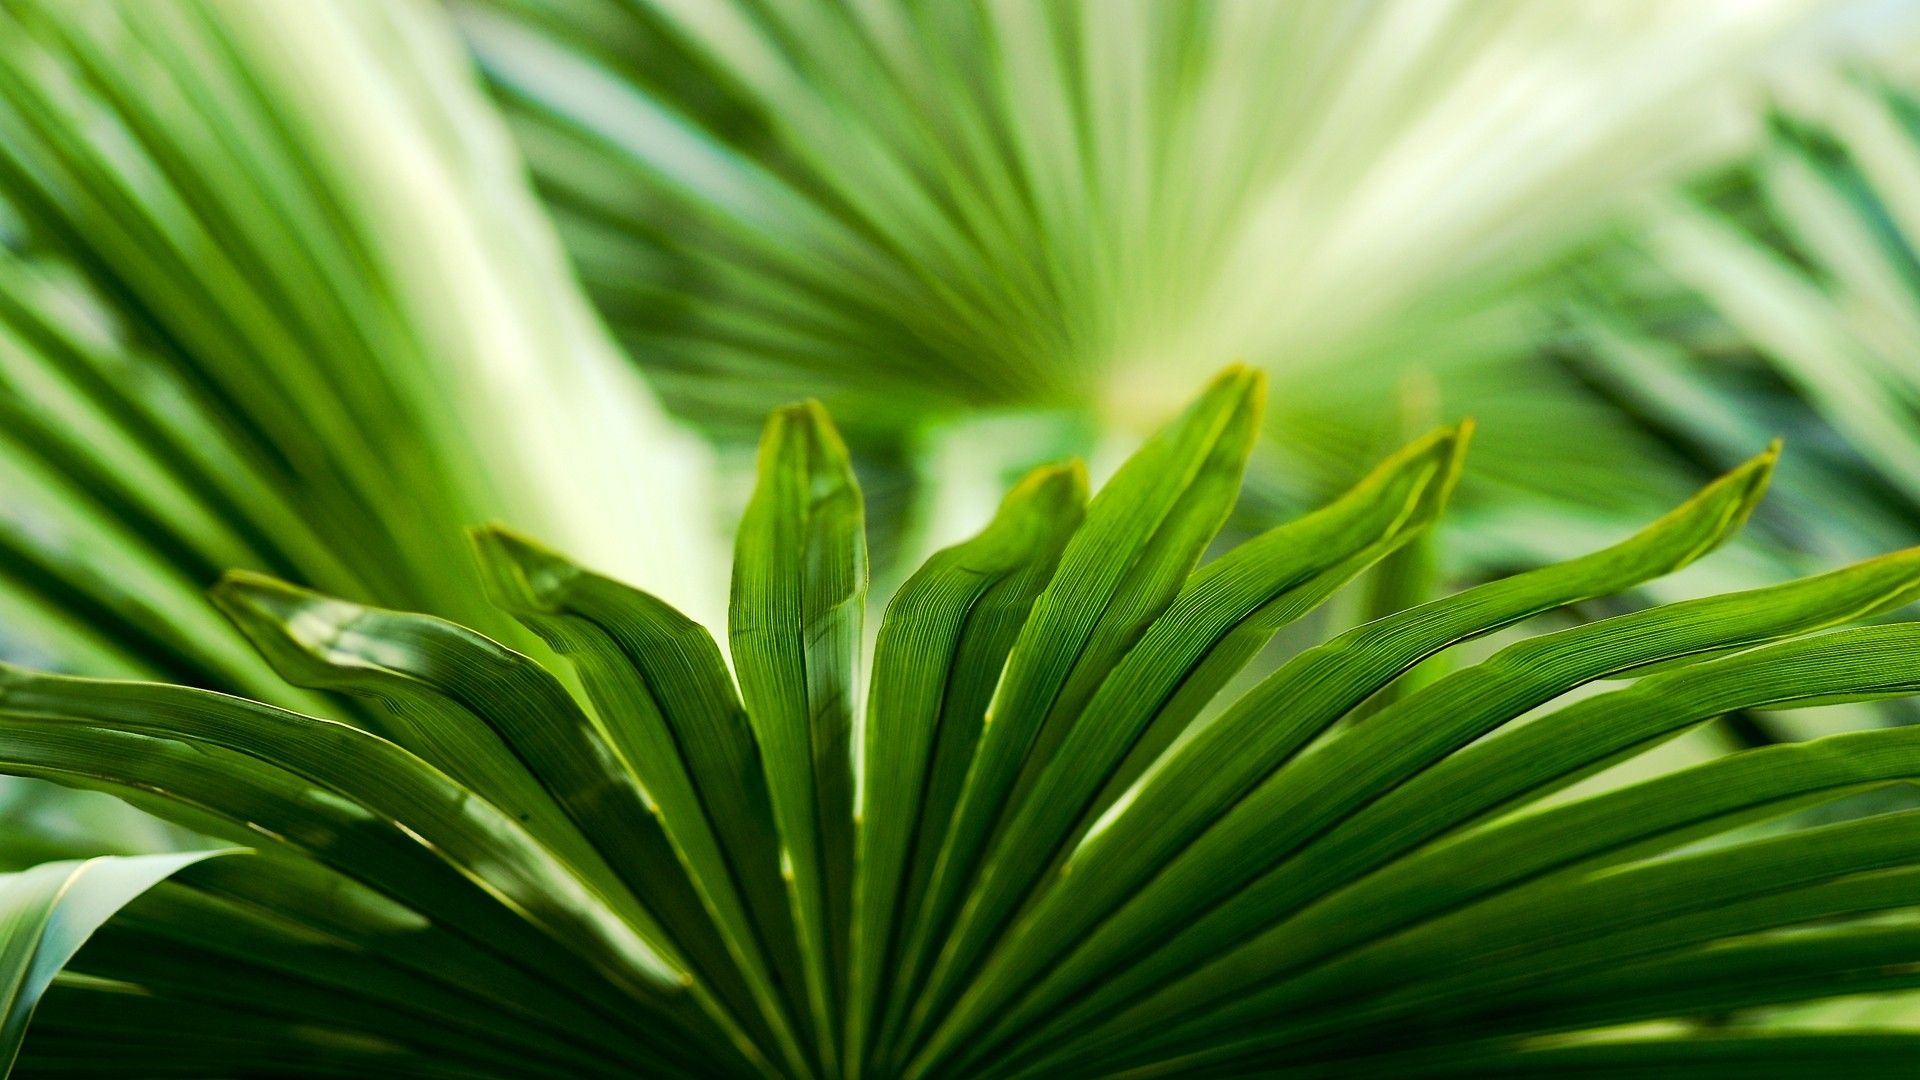 Tropical Leaf Wallpaper: 28 Image, Nature Category